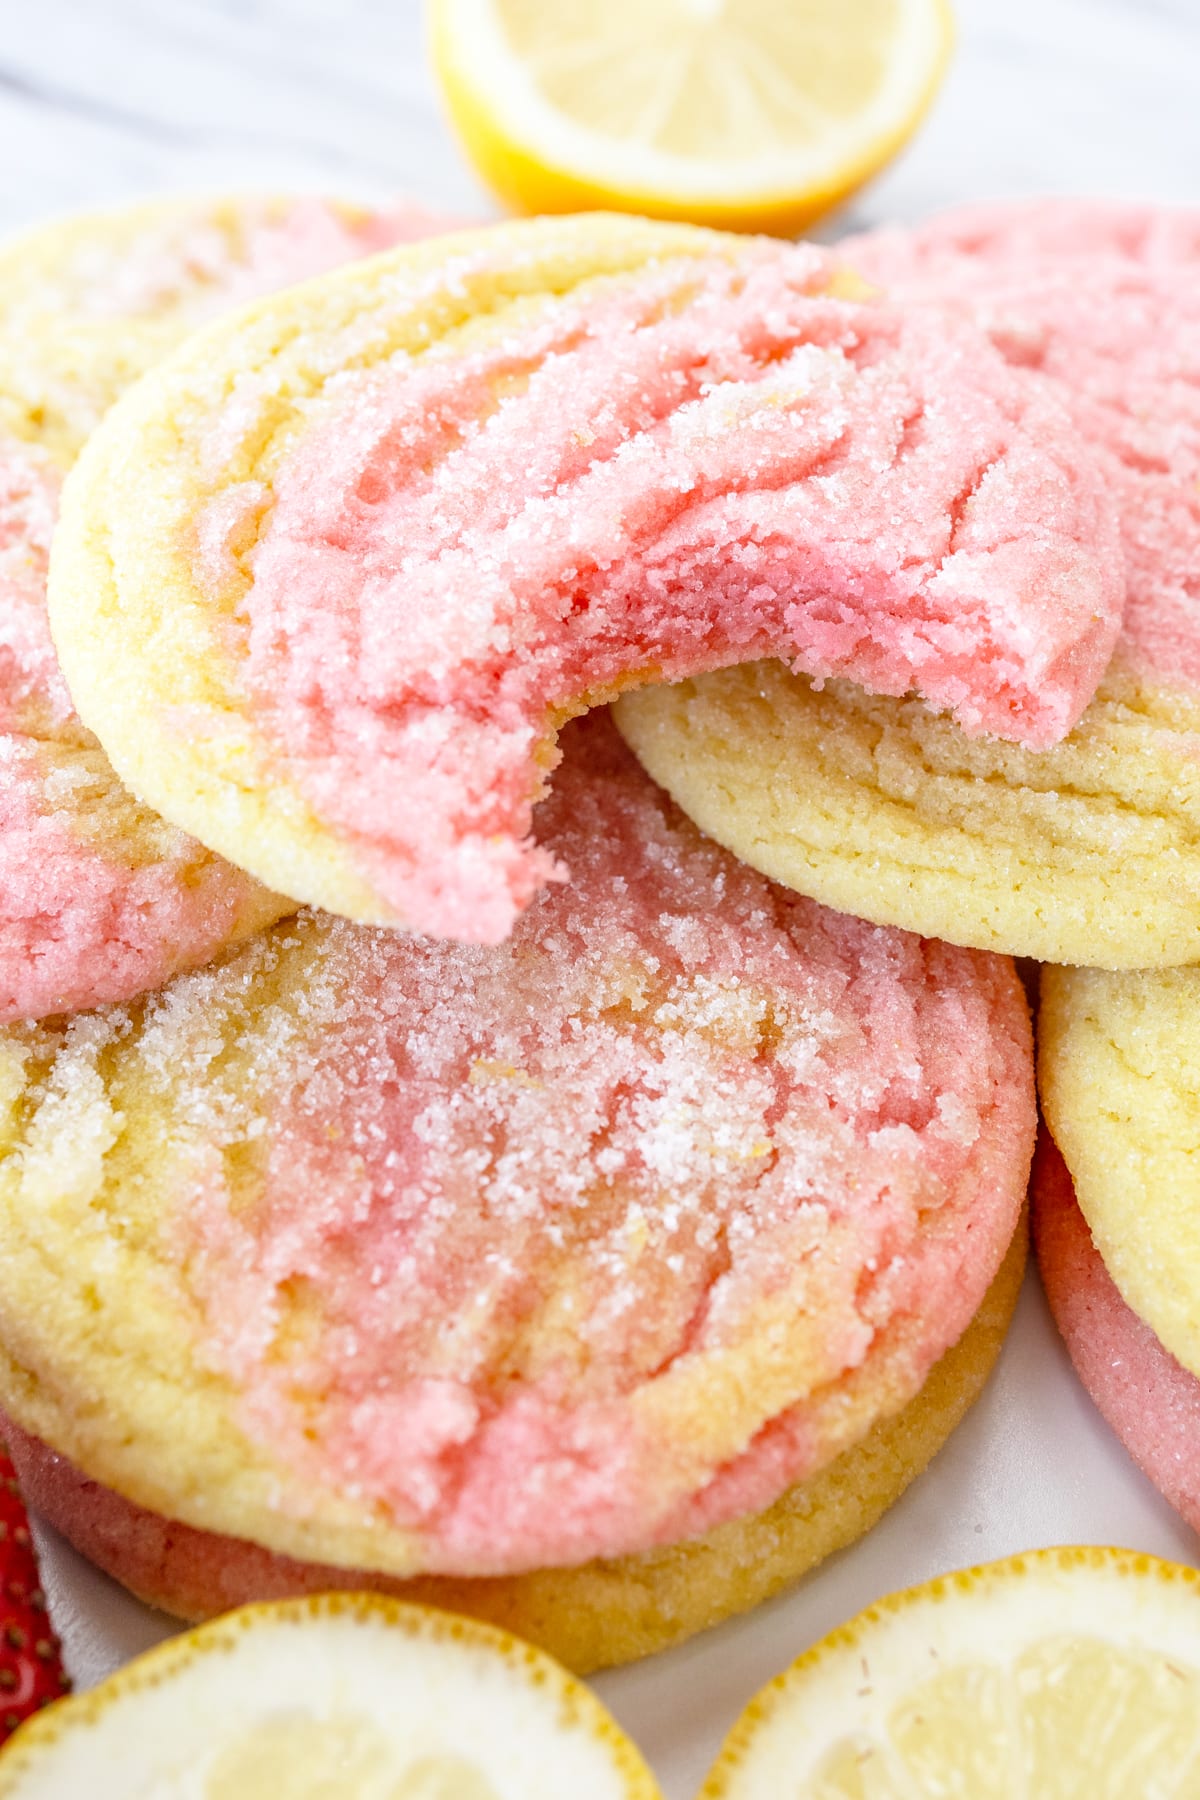 Close-up of Strawberry Lemonade Cookies on a grey surface, arranged in a pile alongside strawberries and slices of lemon.